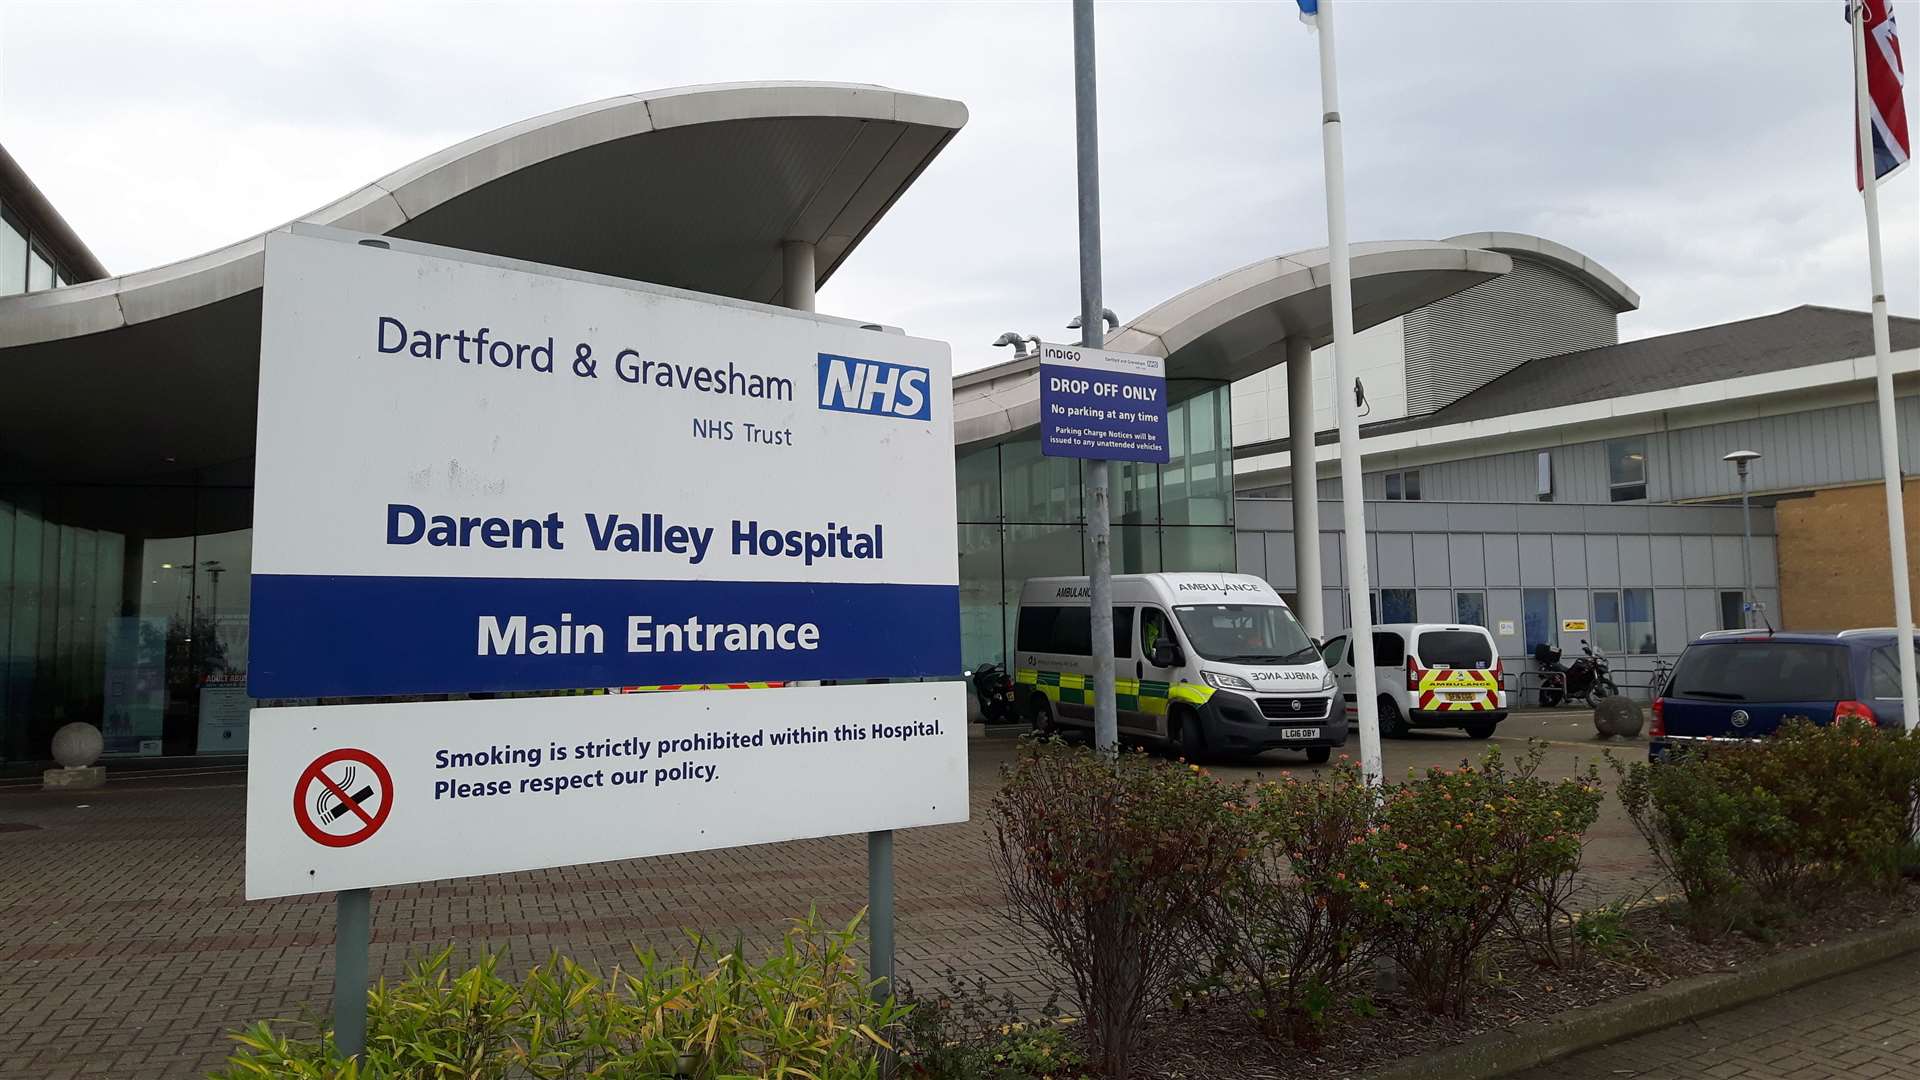 The store is based inside Darent Valley Hospital